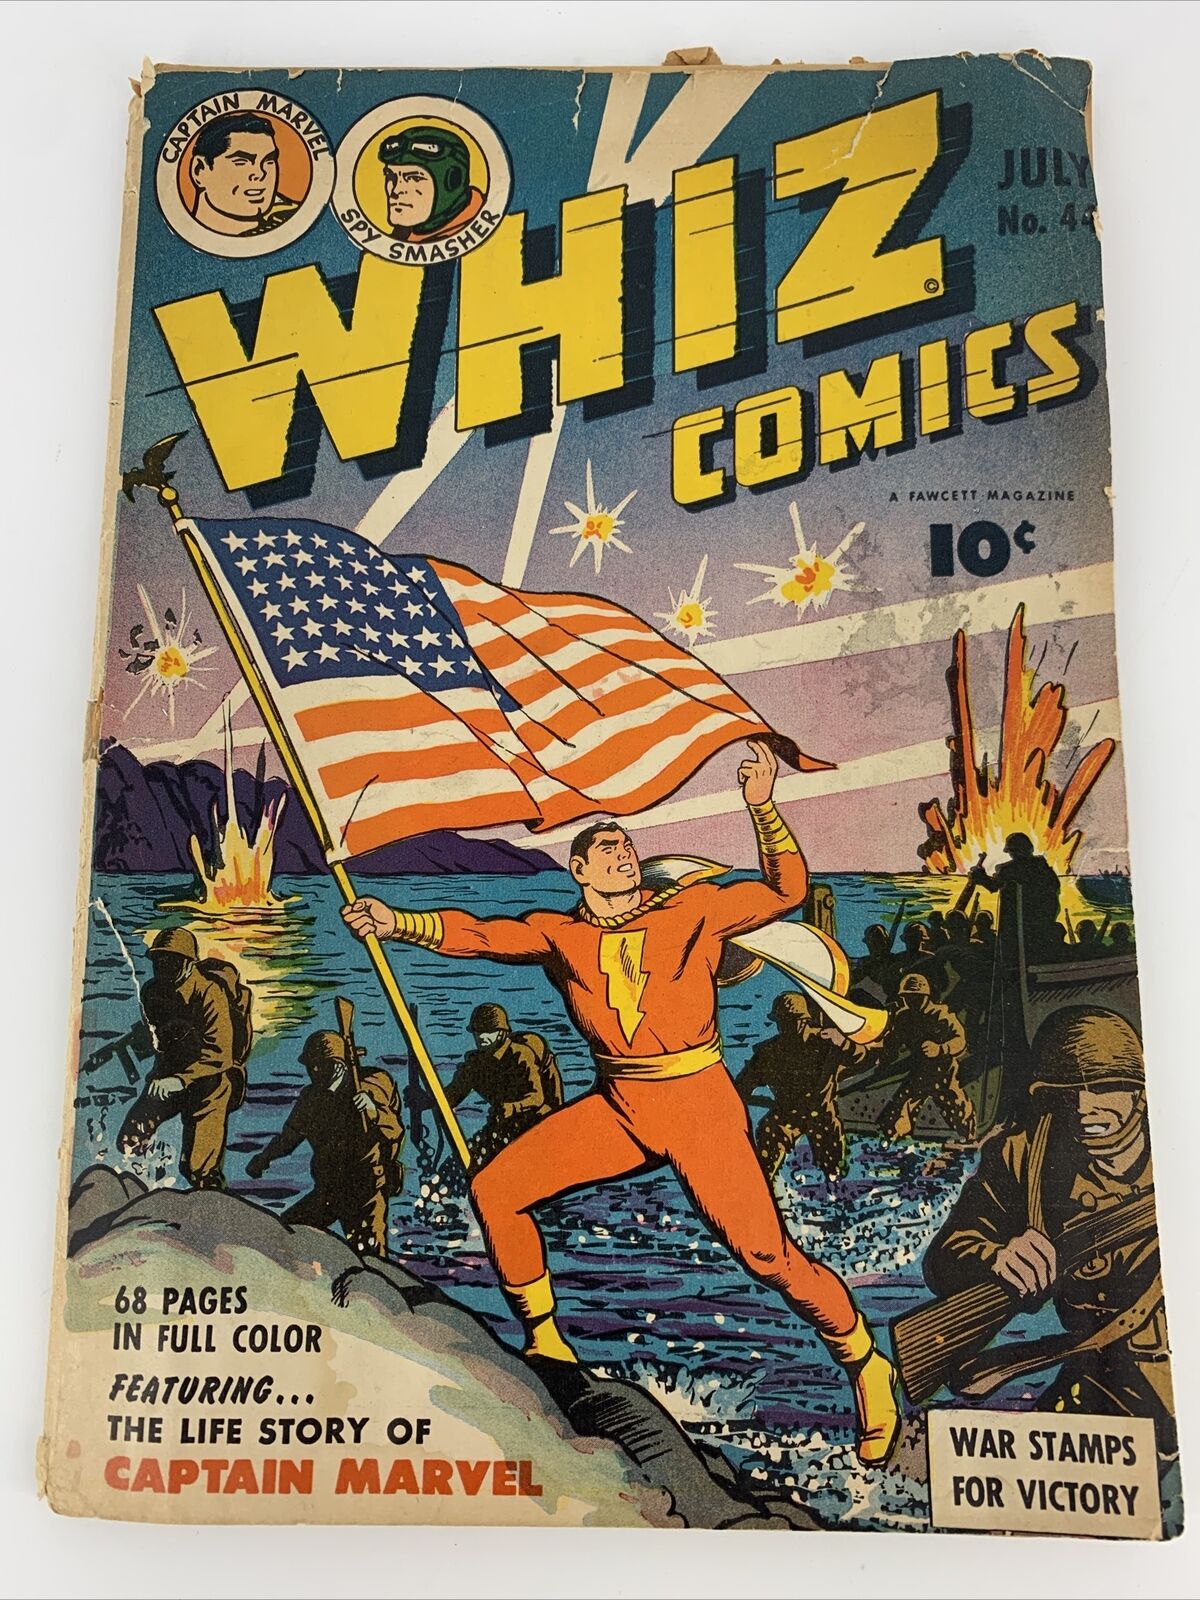 Whiz Comics #44 WWII Flag Cover Captain Marvel 1943 Missing 4 Pgs Detached Cover